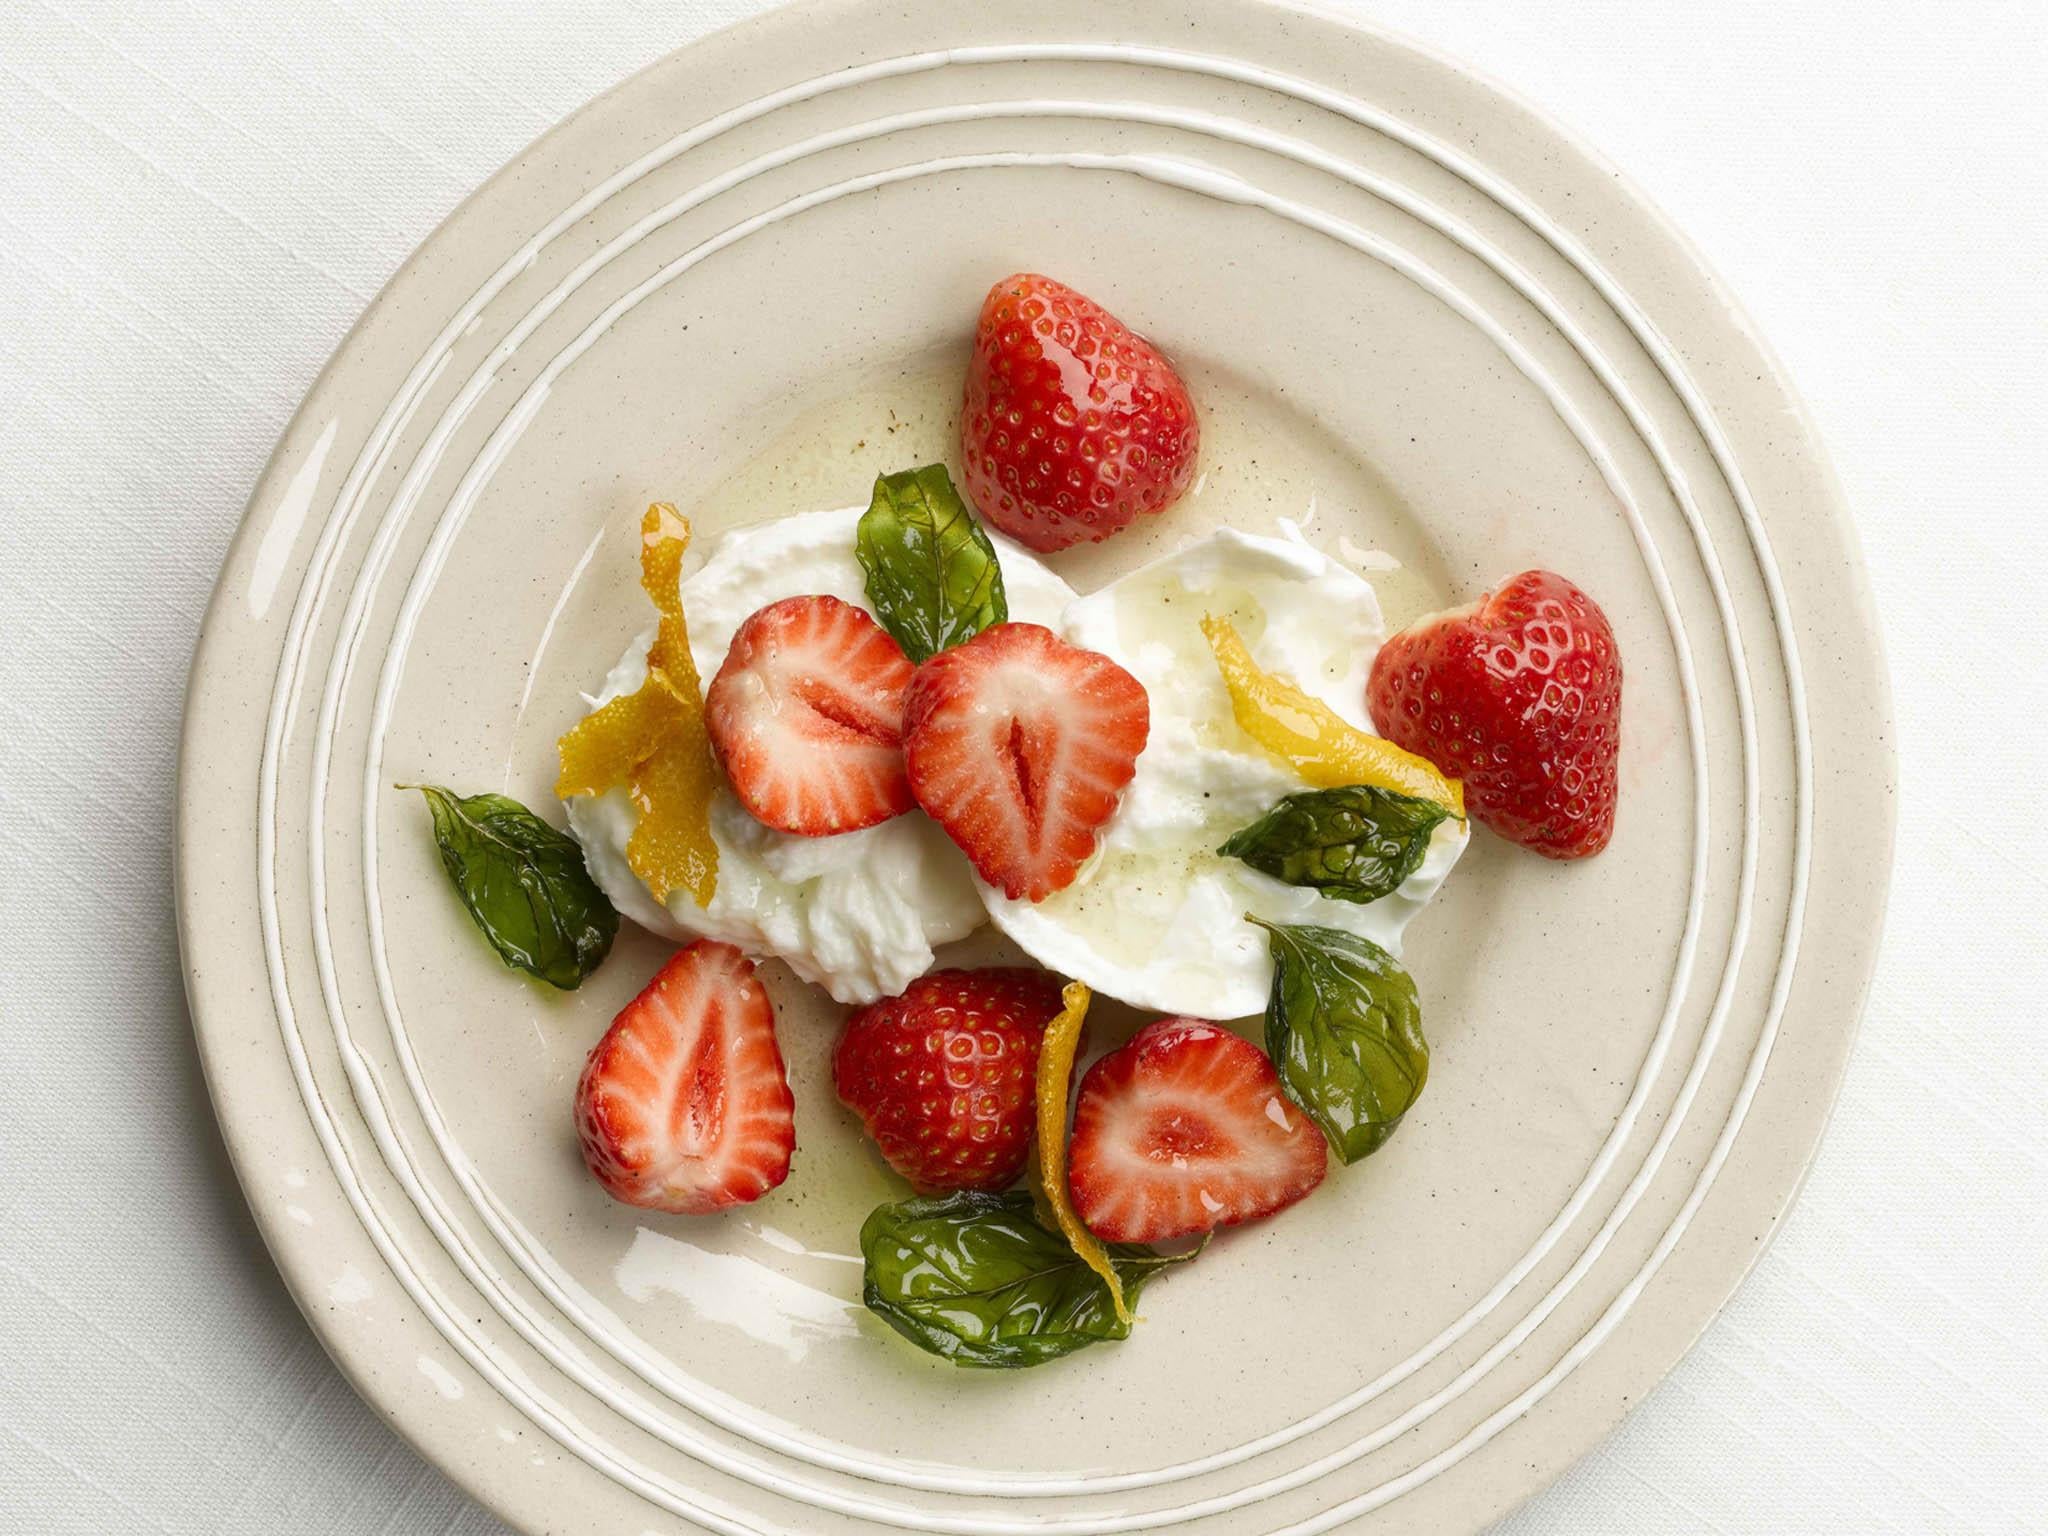 Strawberries have their own natural sweetness, but partner them with mozzarella, lemon and basil for a modern way to eat them